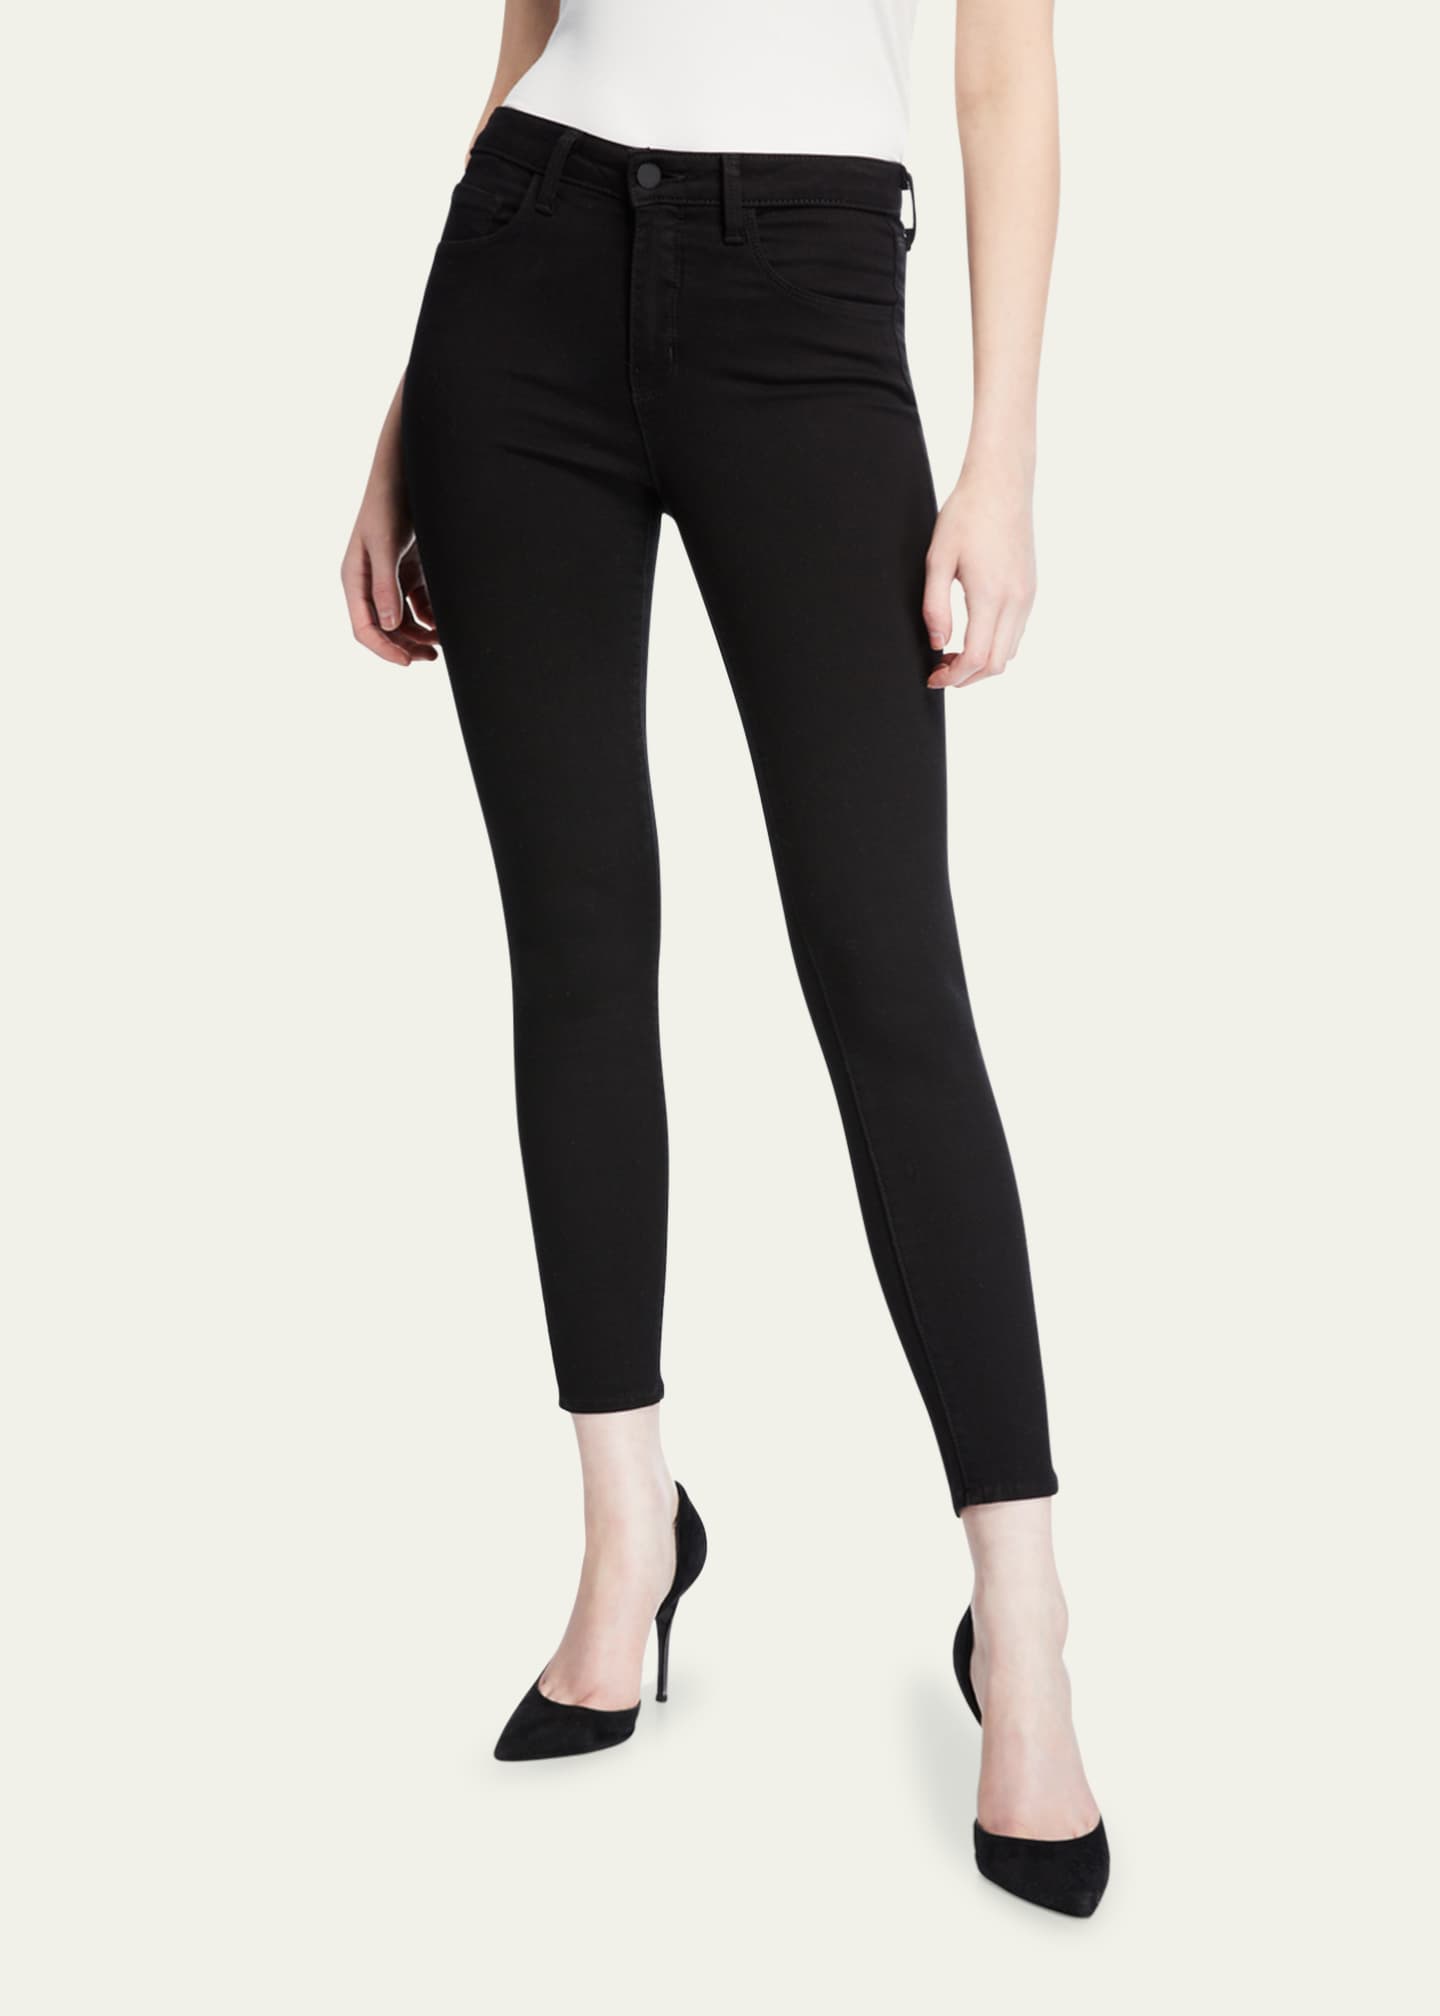 L'Agence Margot High-Rise Skinny Ankle Jeans Image 2 of 5